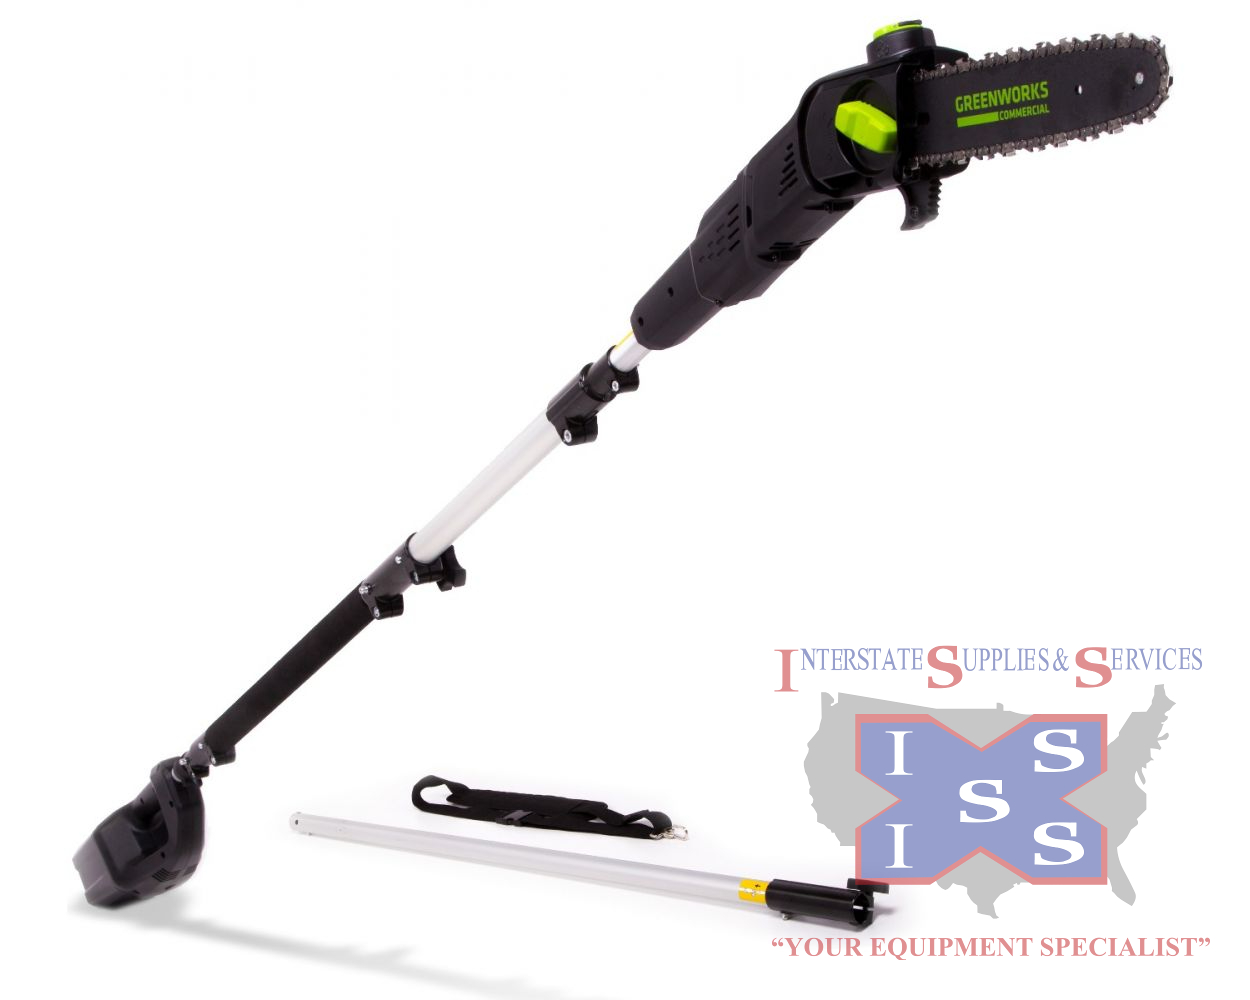 GS100 82-Volt 10" Pole Saw (Tool Only)